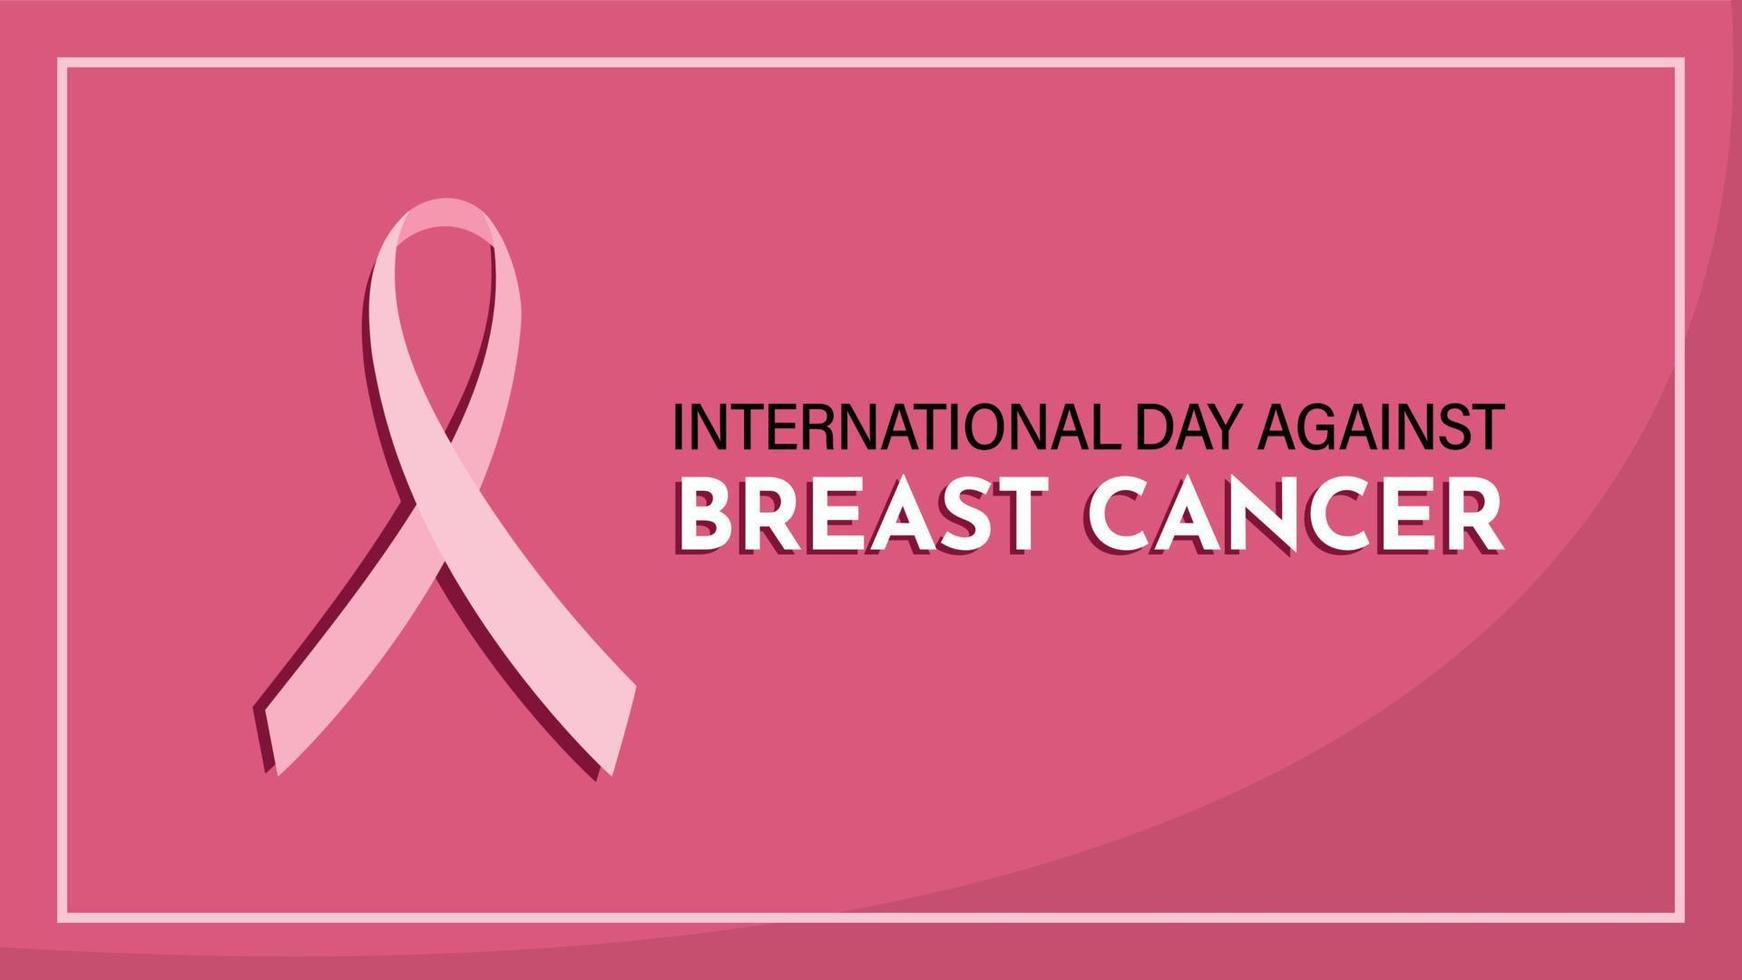 International day against breast cancer wallpaper background vector